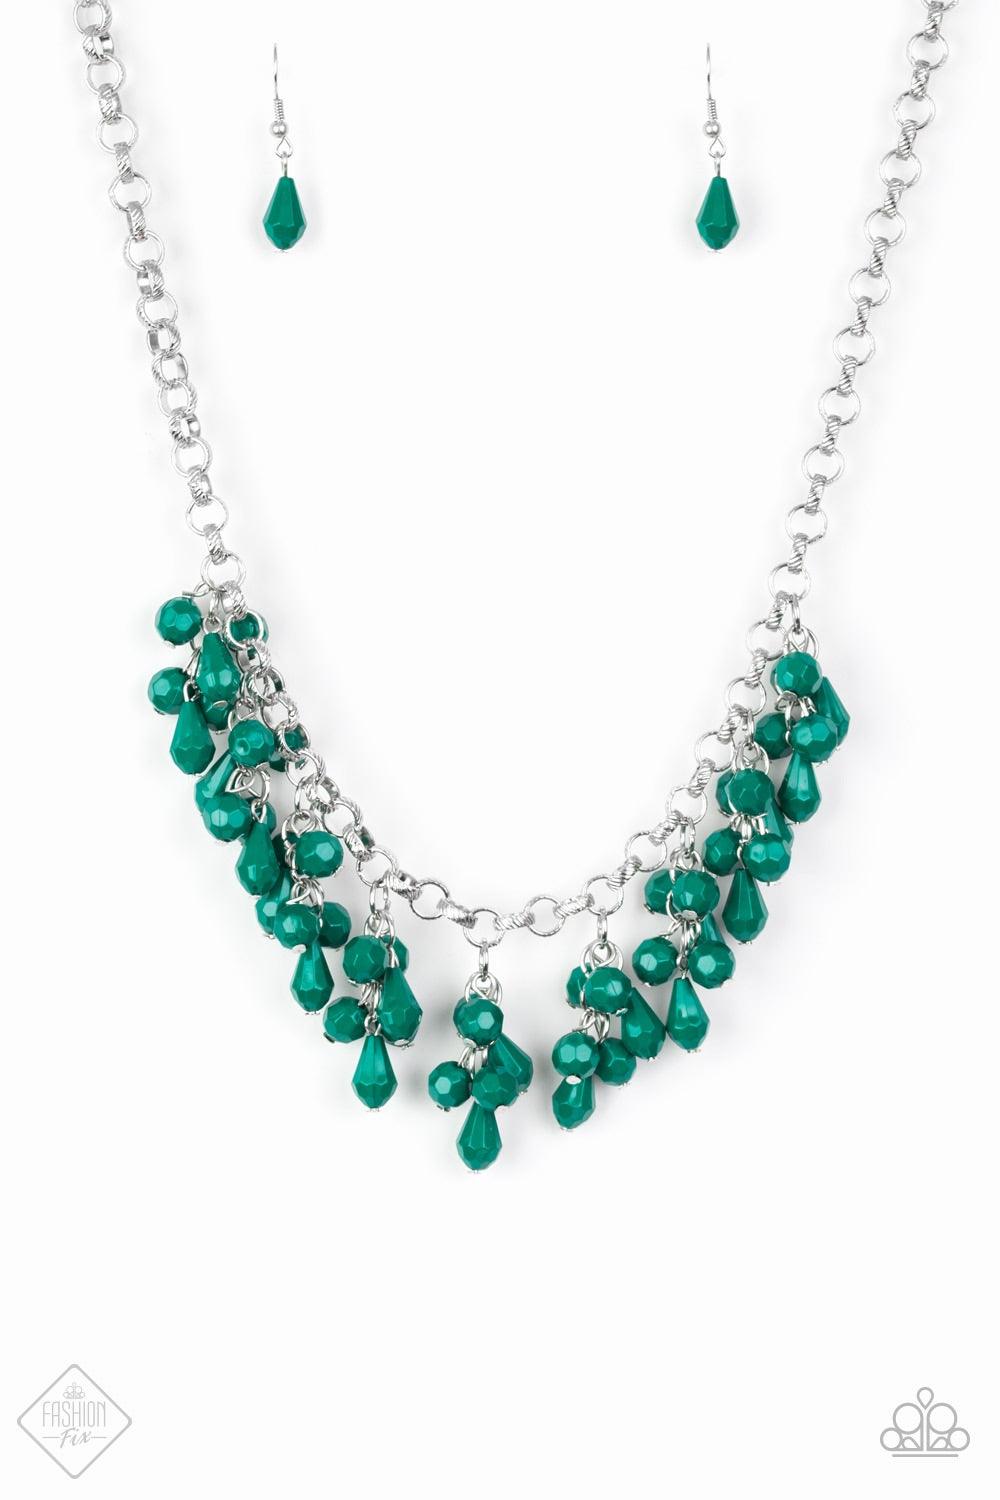 Paparazzi Accessories Modern Macarena - Green Featuring round and teardrop shapes, clusters of faceted Quetzal Green beads swing from the bottom of a shimmery silver chain, creating a playful fringe below the collar. Features an adjustable clasp closure.